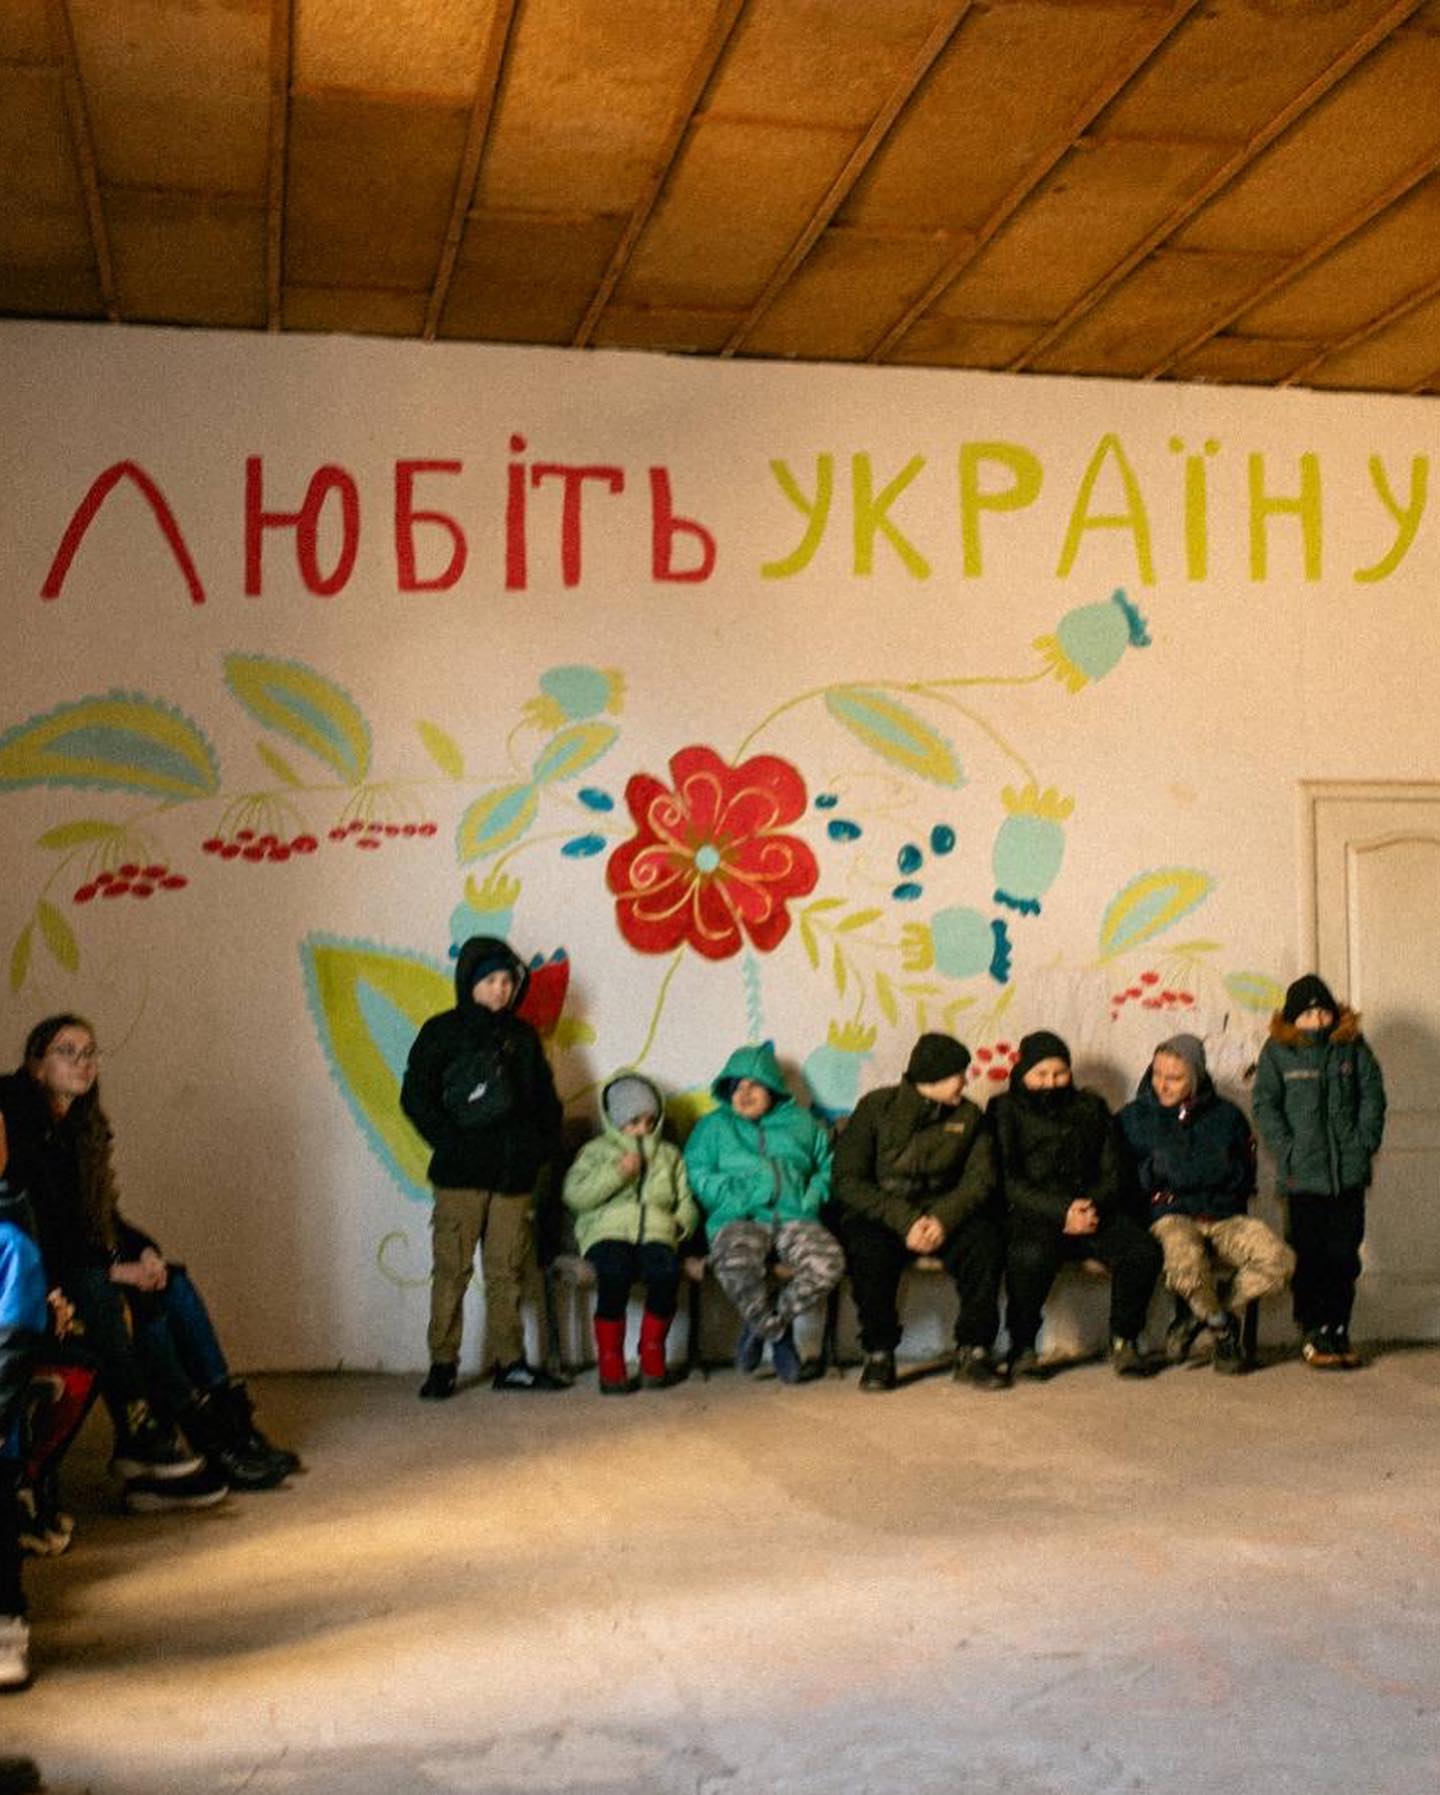 A group of people sitting in front of a painted wall.